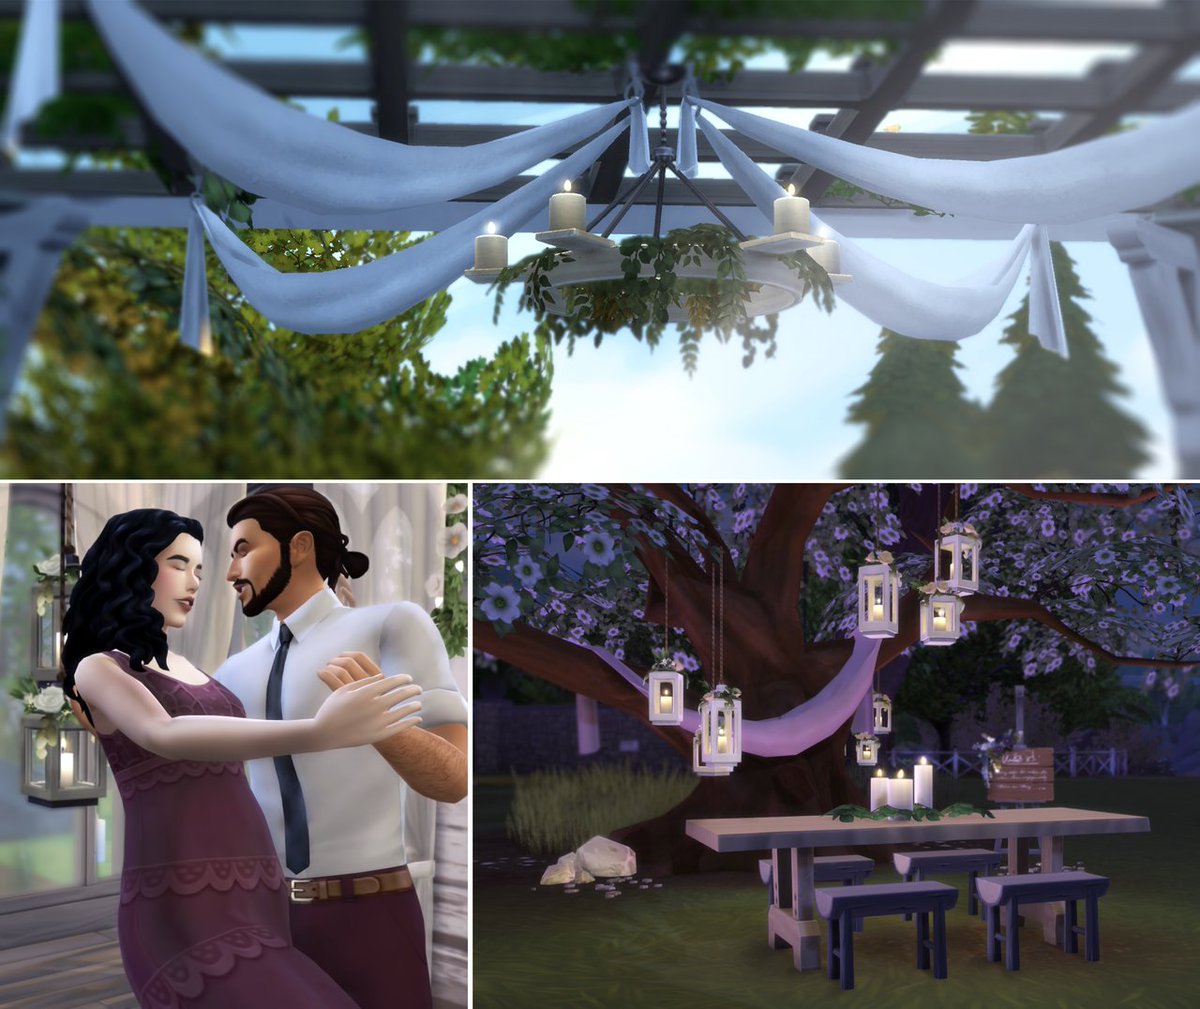 Sims Community على تويتر Thesims4 Rustic Romance Custom Stuff Pack Is Now Available Bringing Over 70 New Items T Co Bnvkkvkkex